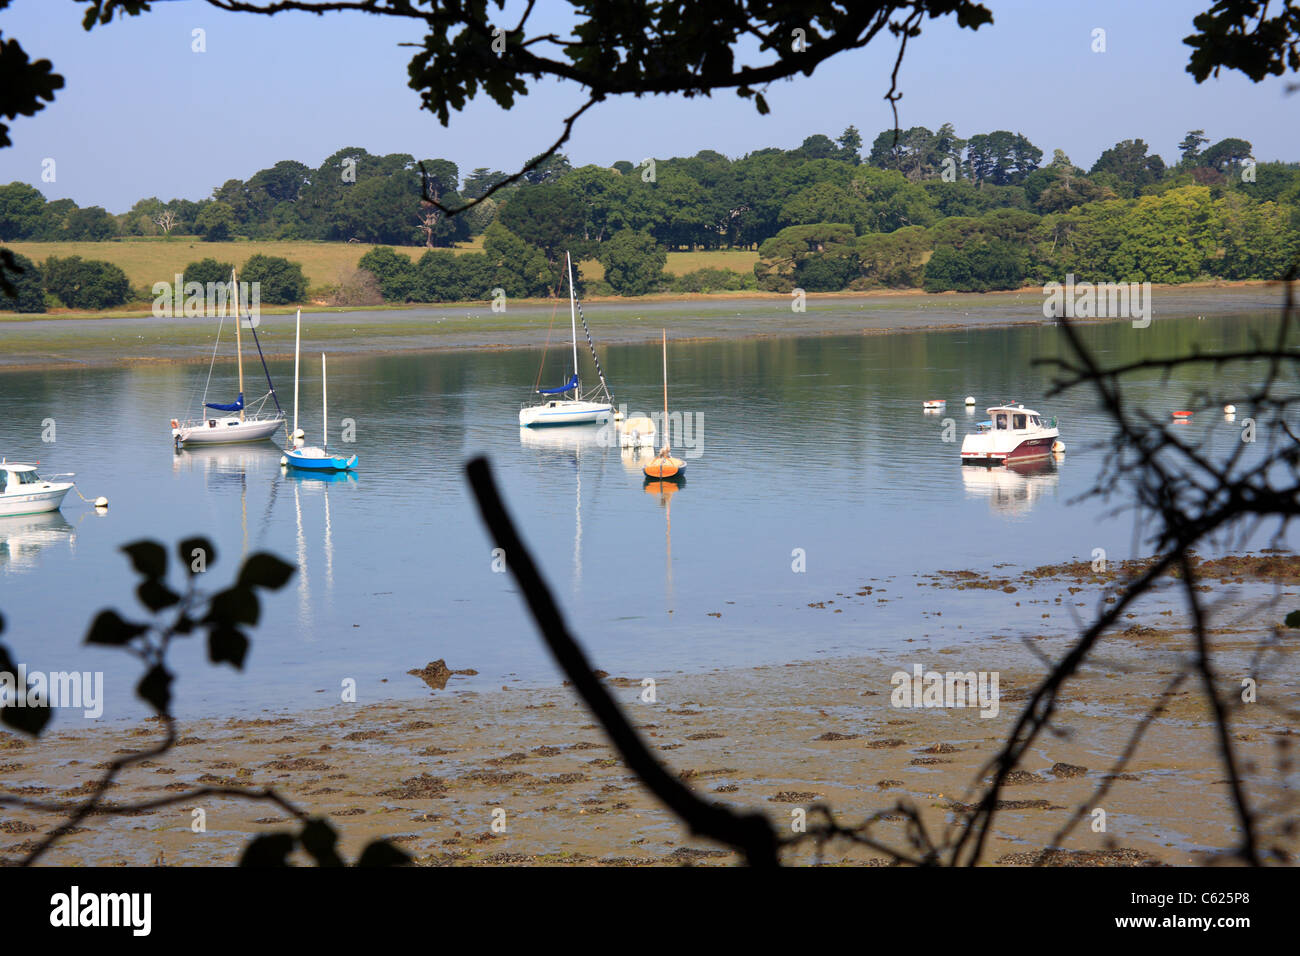 Low tide at Riviere d'Auray, Point Noire, Le Rohello, Baden, Morbihan, Brittany, France Stock Photo